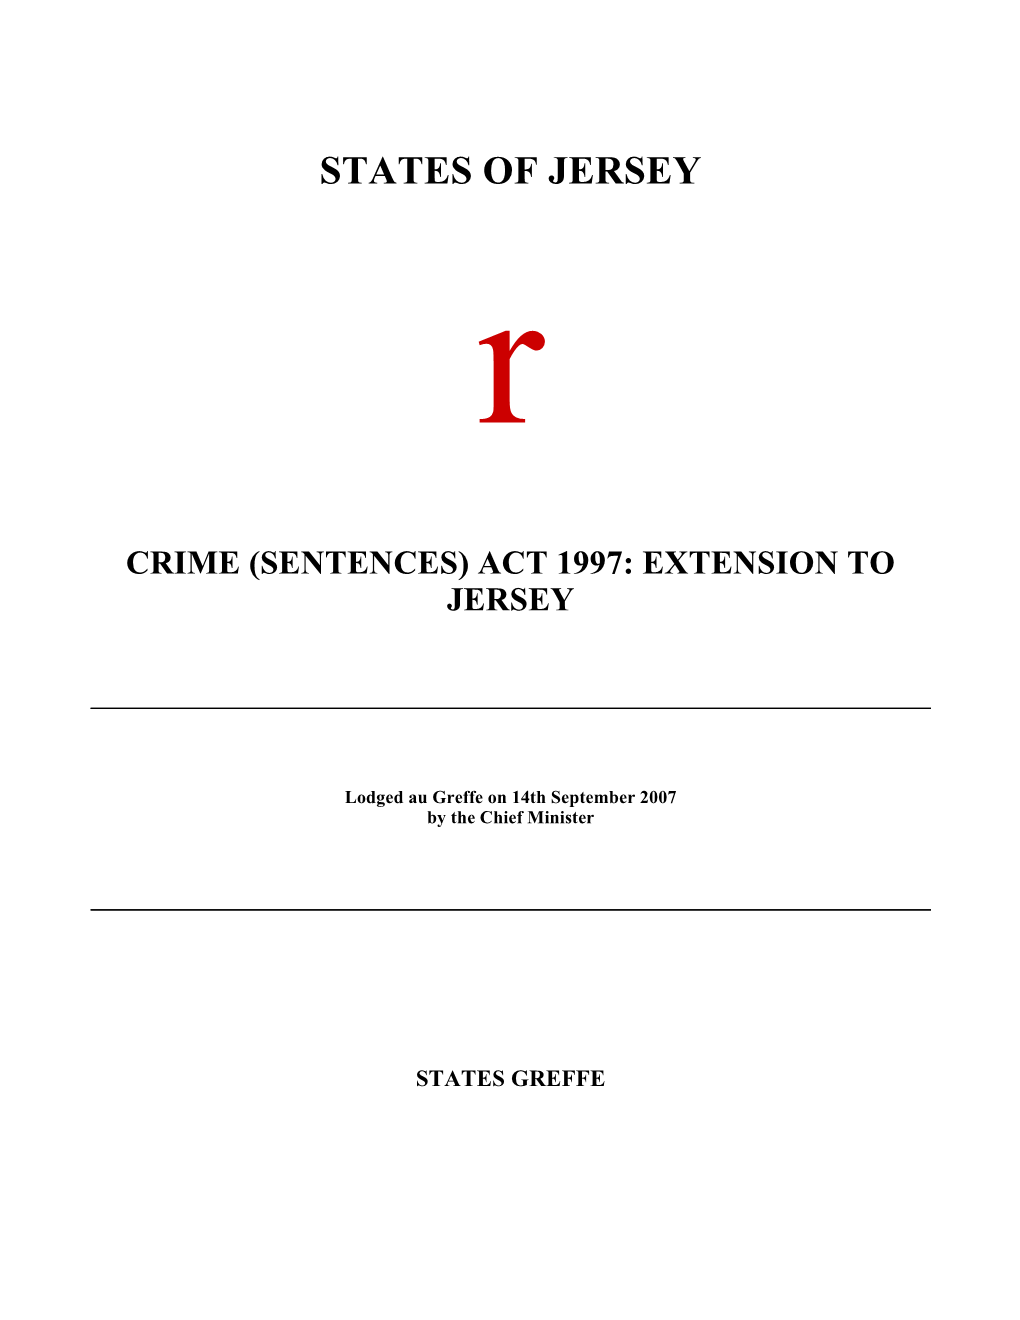 Crime (Sentences) Act 1997: Extension to Jersey